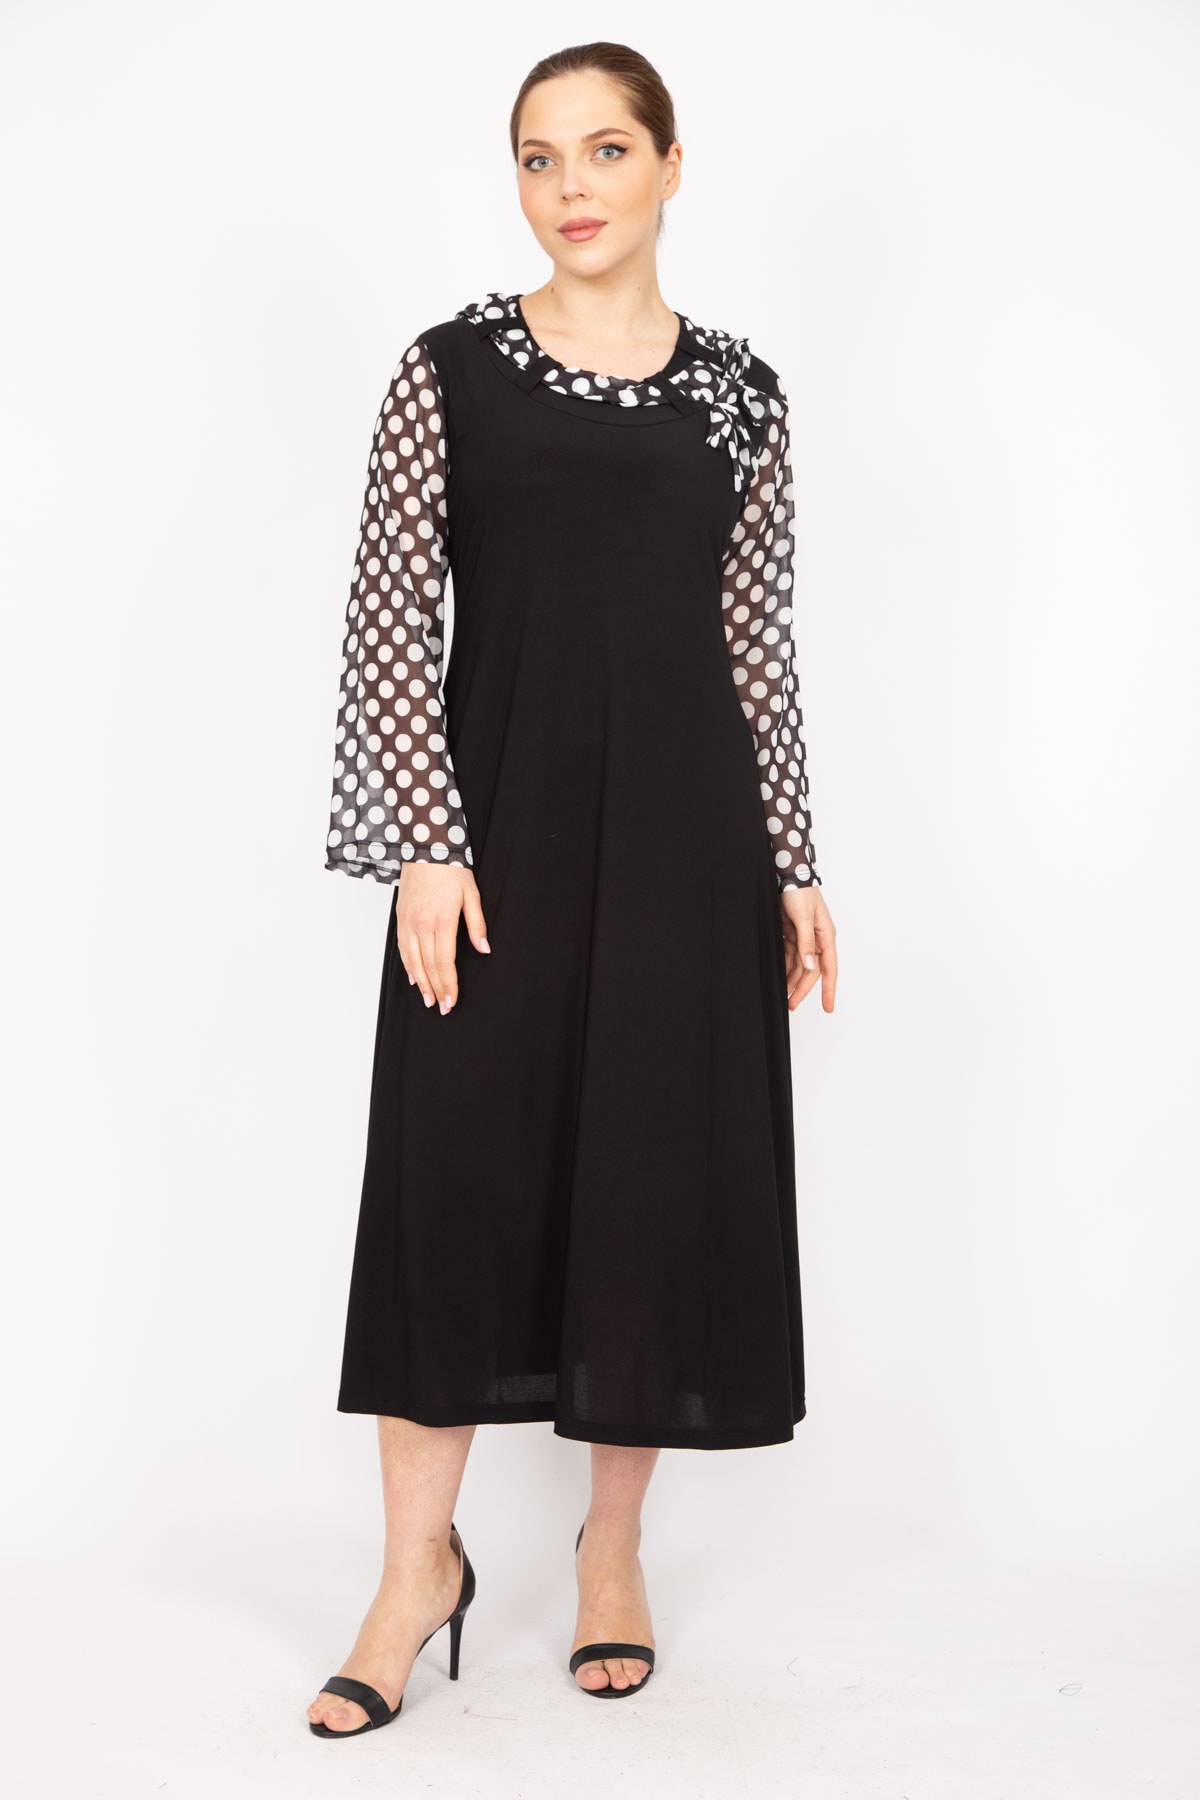 Levně Şans Women's Black Plus Size Dress with Chiffon Collar Detailed with Sleeves